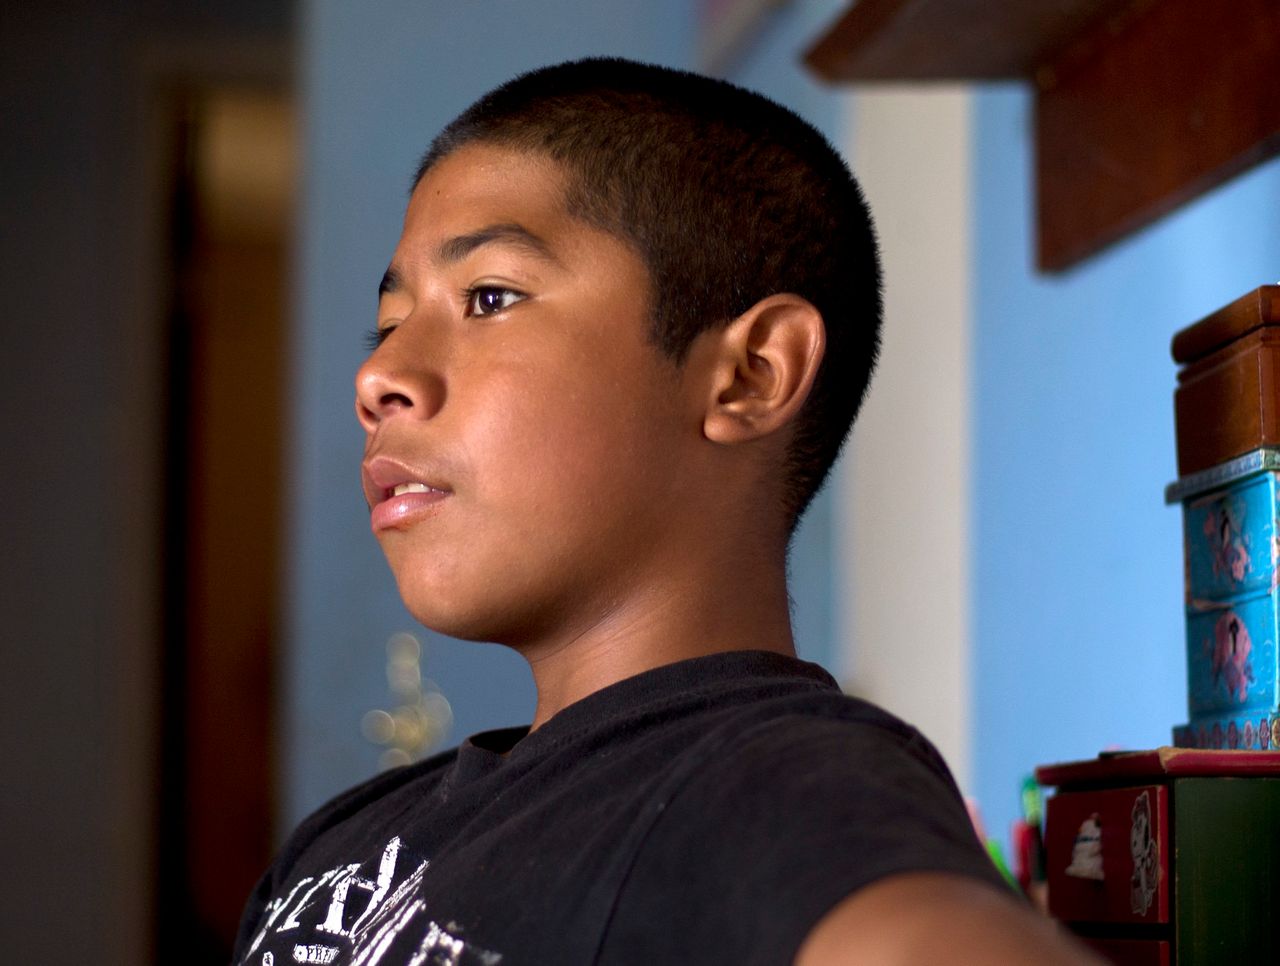 He's 12. He Has ADHD. And His Family Is Fighting To Keep Him Out Of The  Juvenile Court System